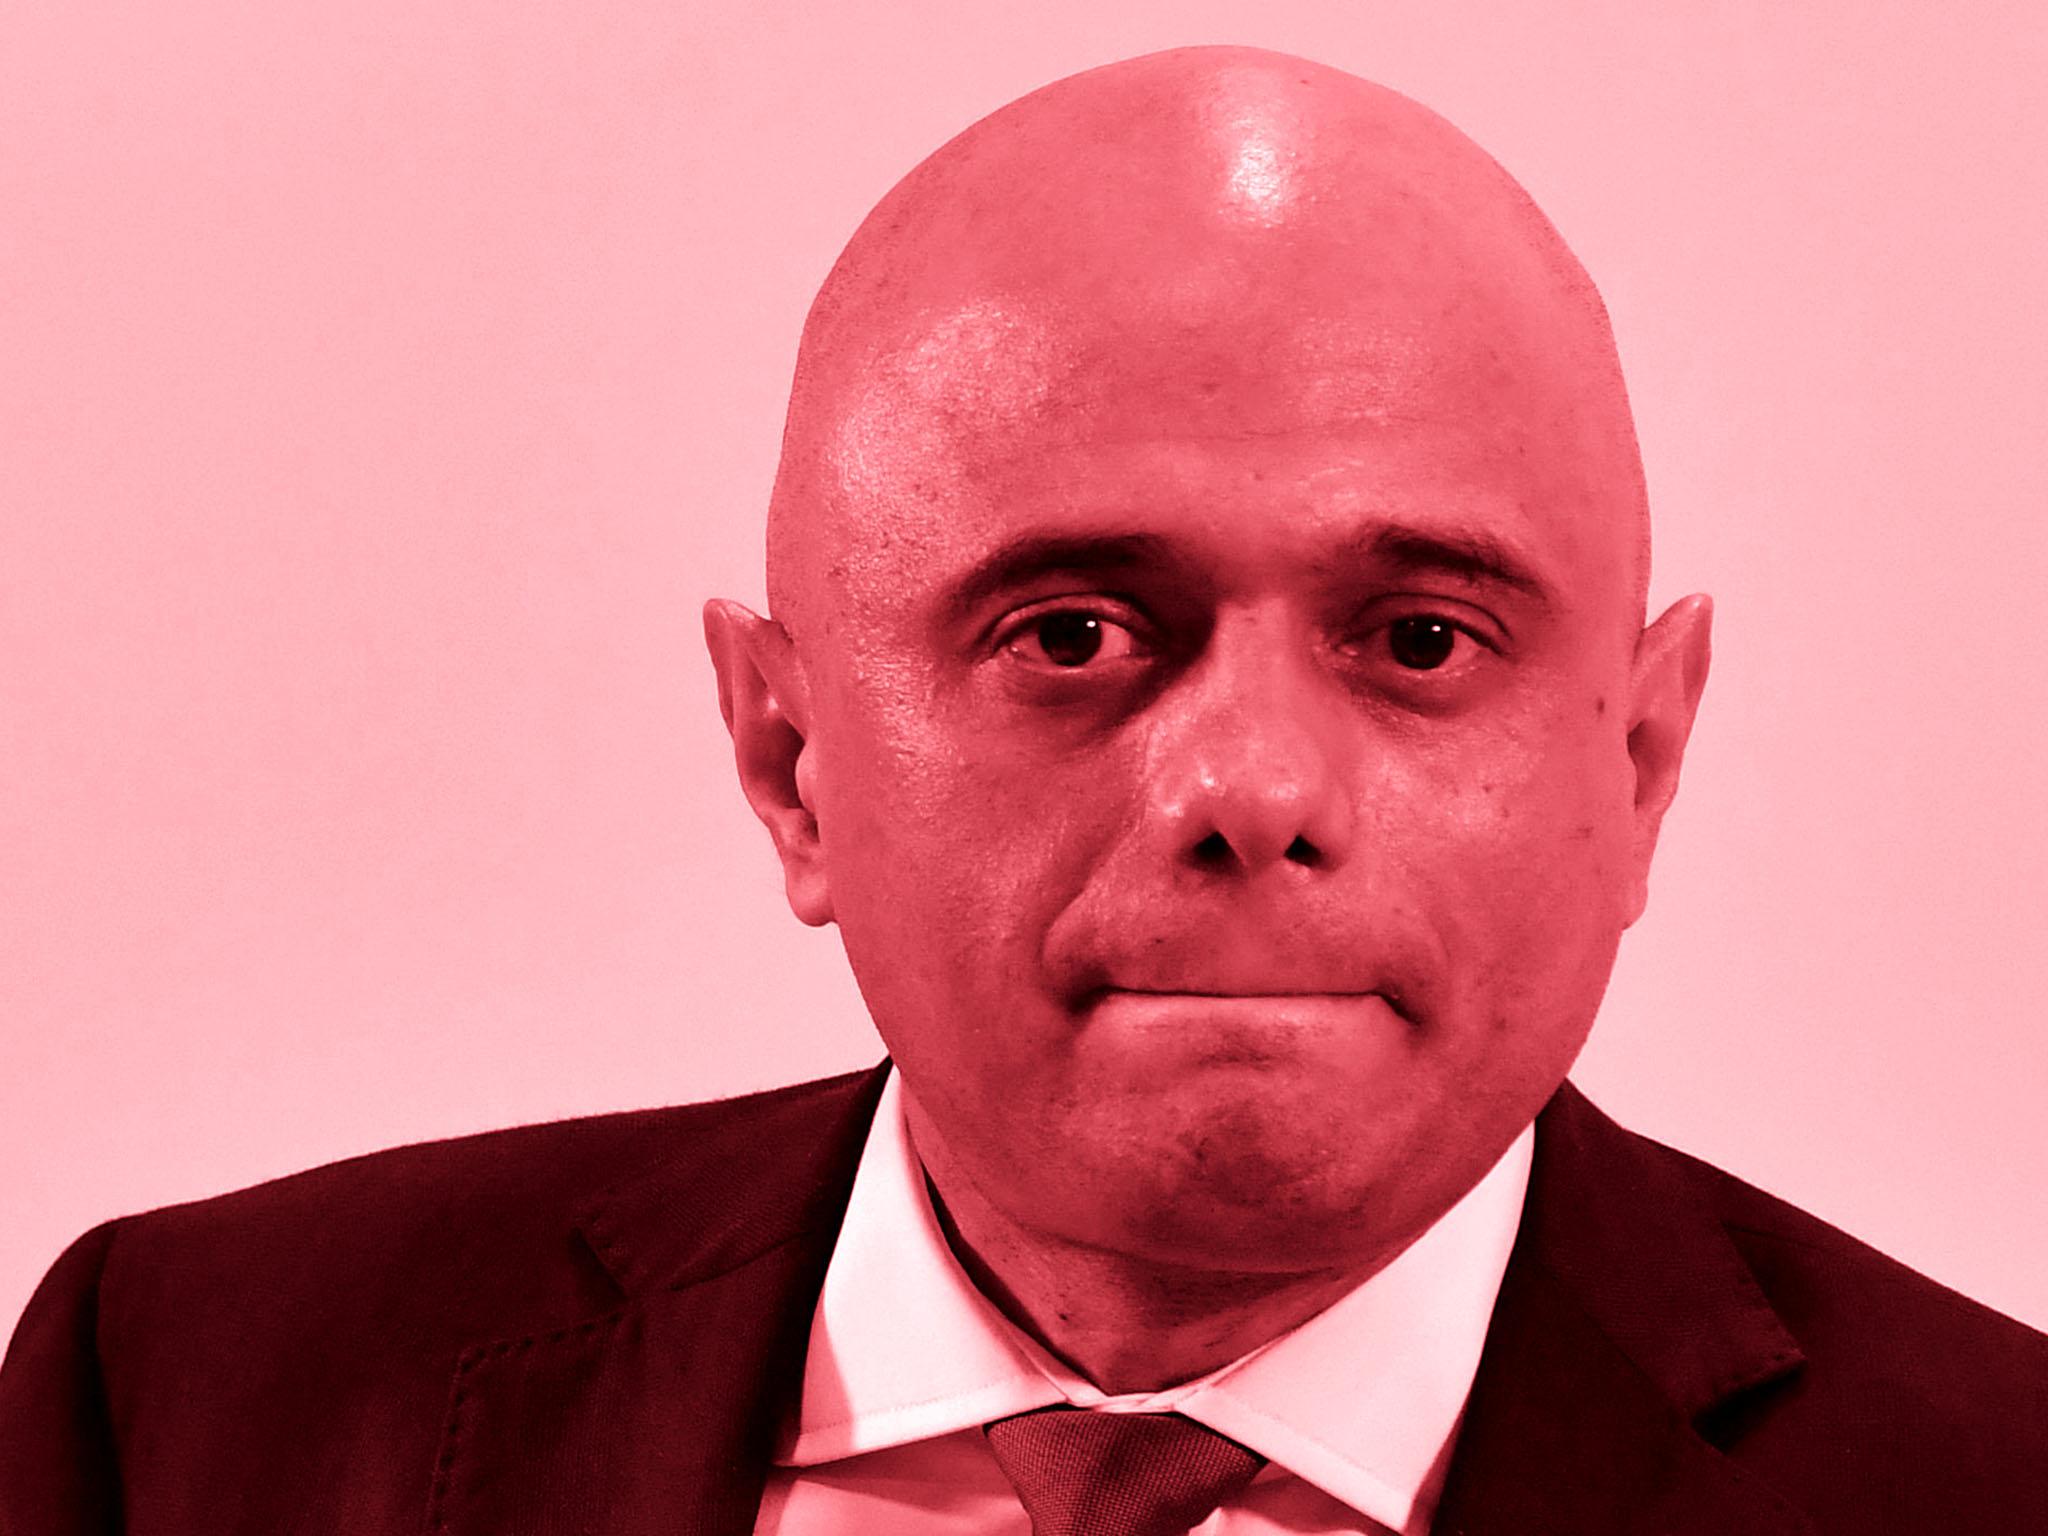 Brexit Sajid Javid S Contentious Claims Fact Checked The Independent The Independent